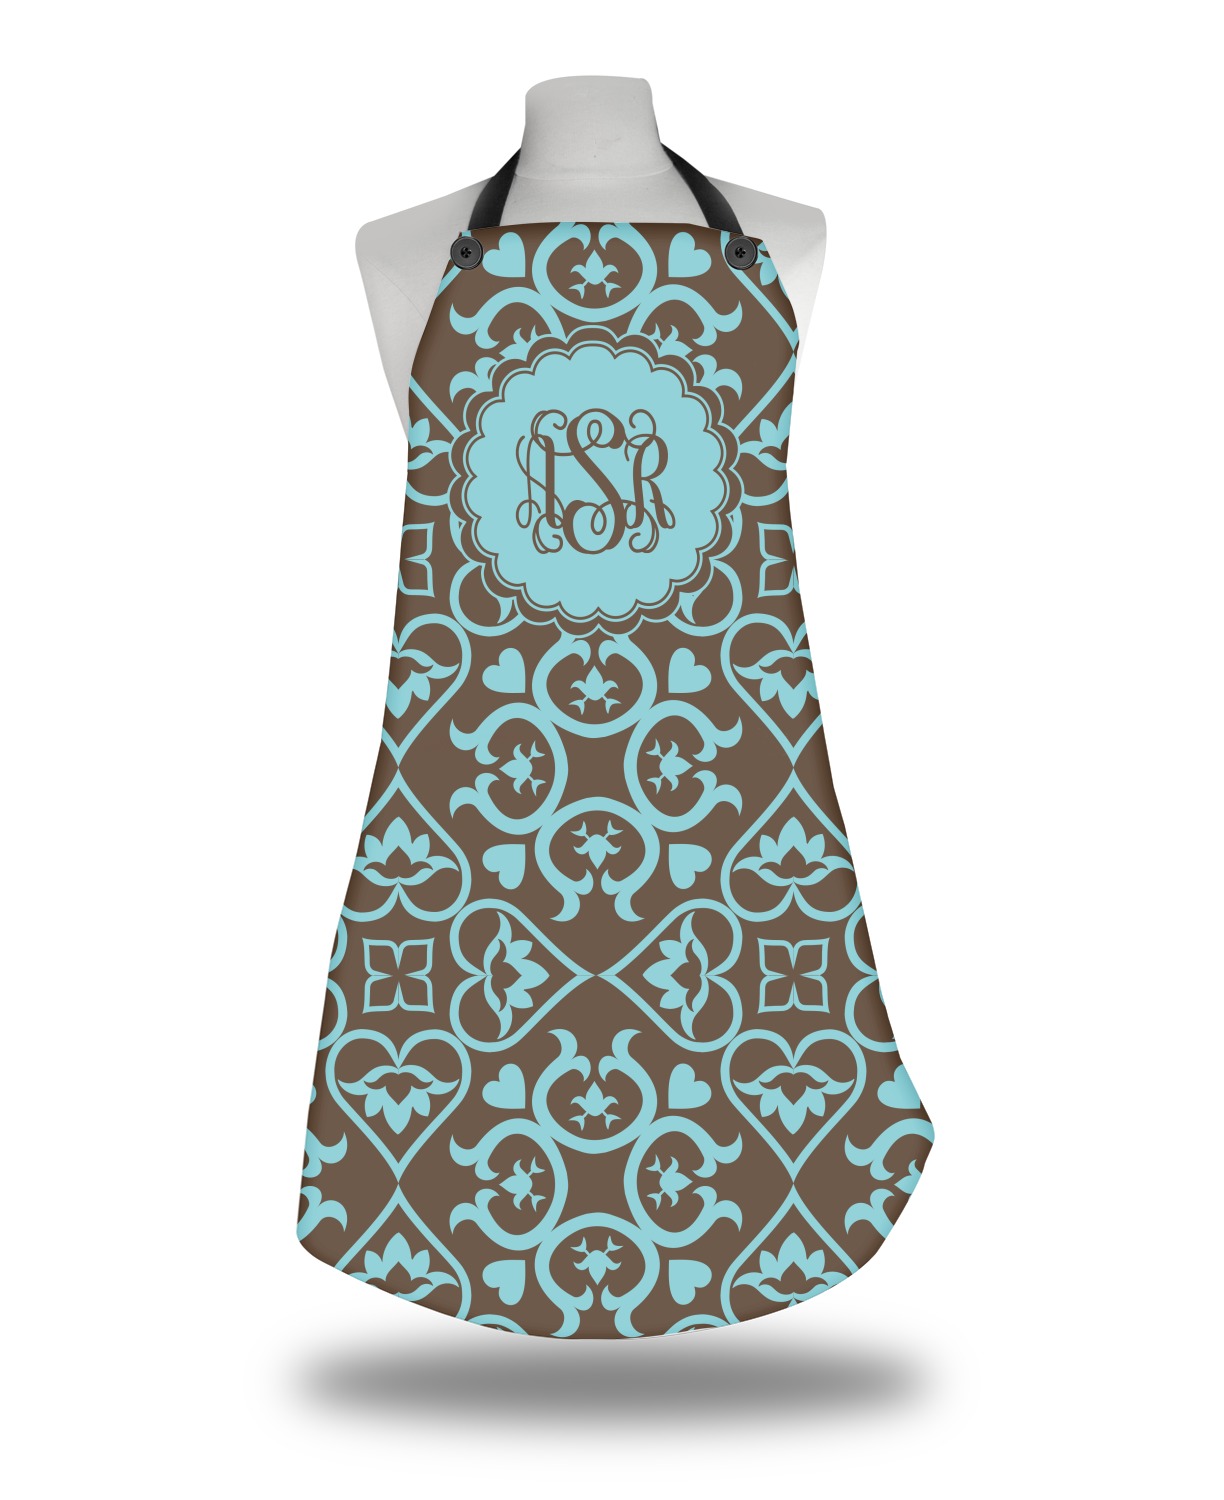 Floral Apron Without Pockets w/ Monogram - YouCustomizeIt